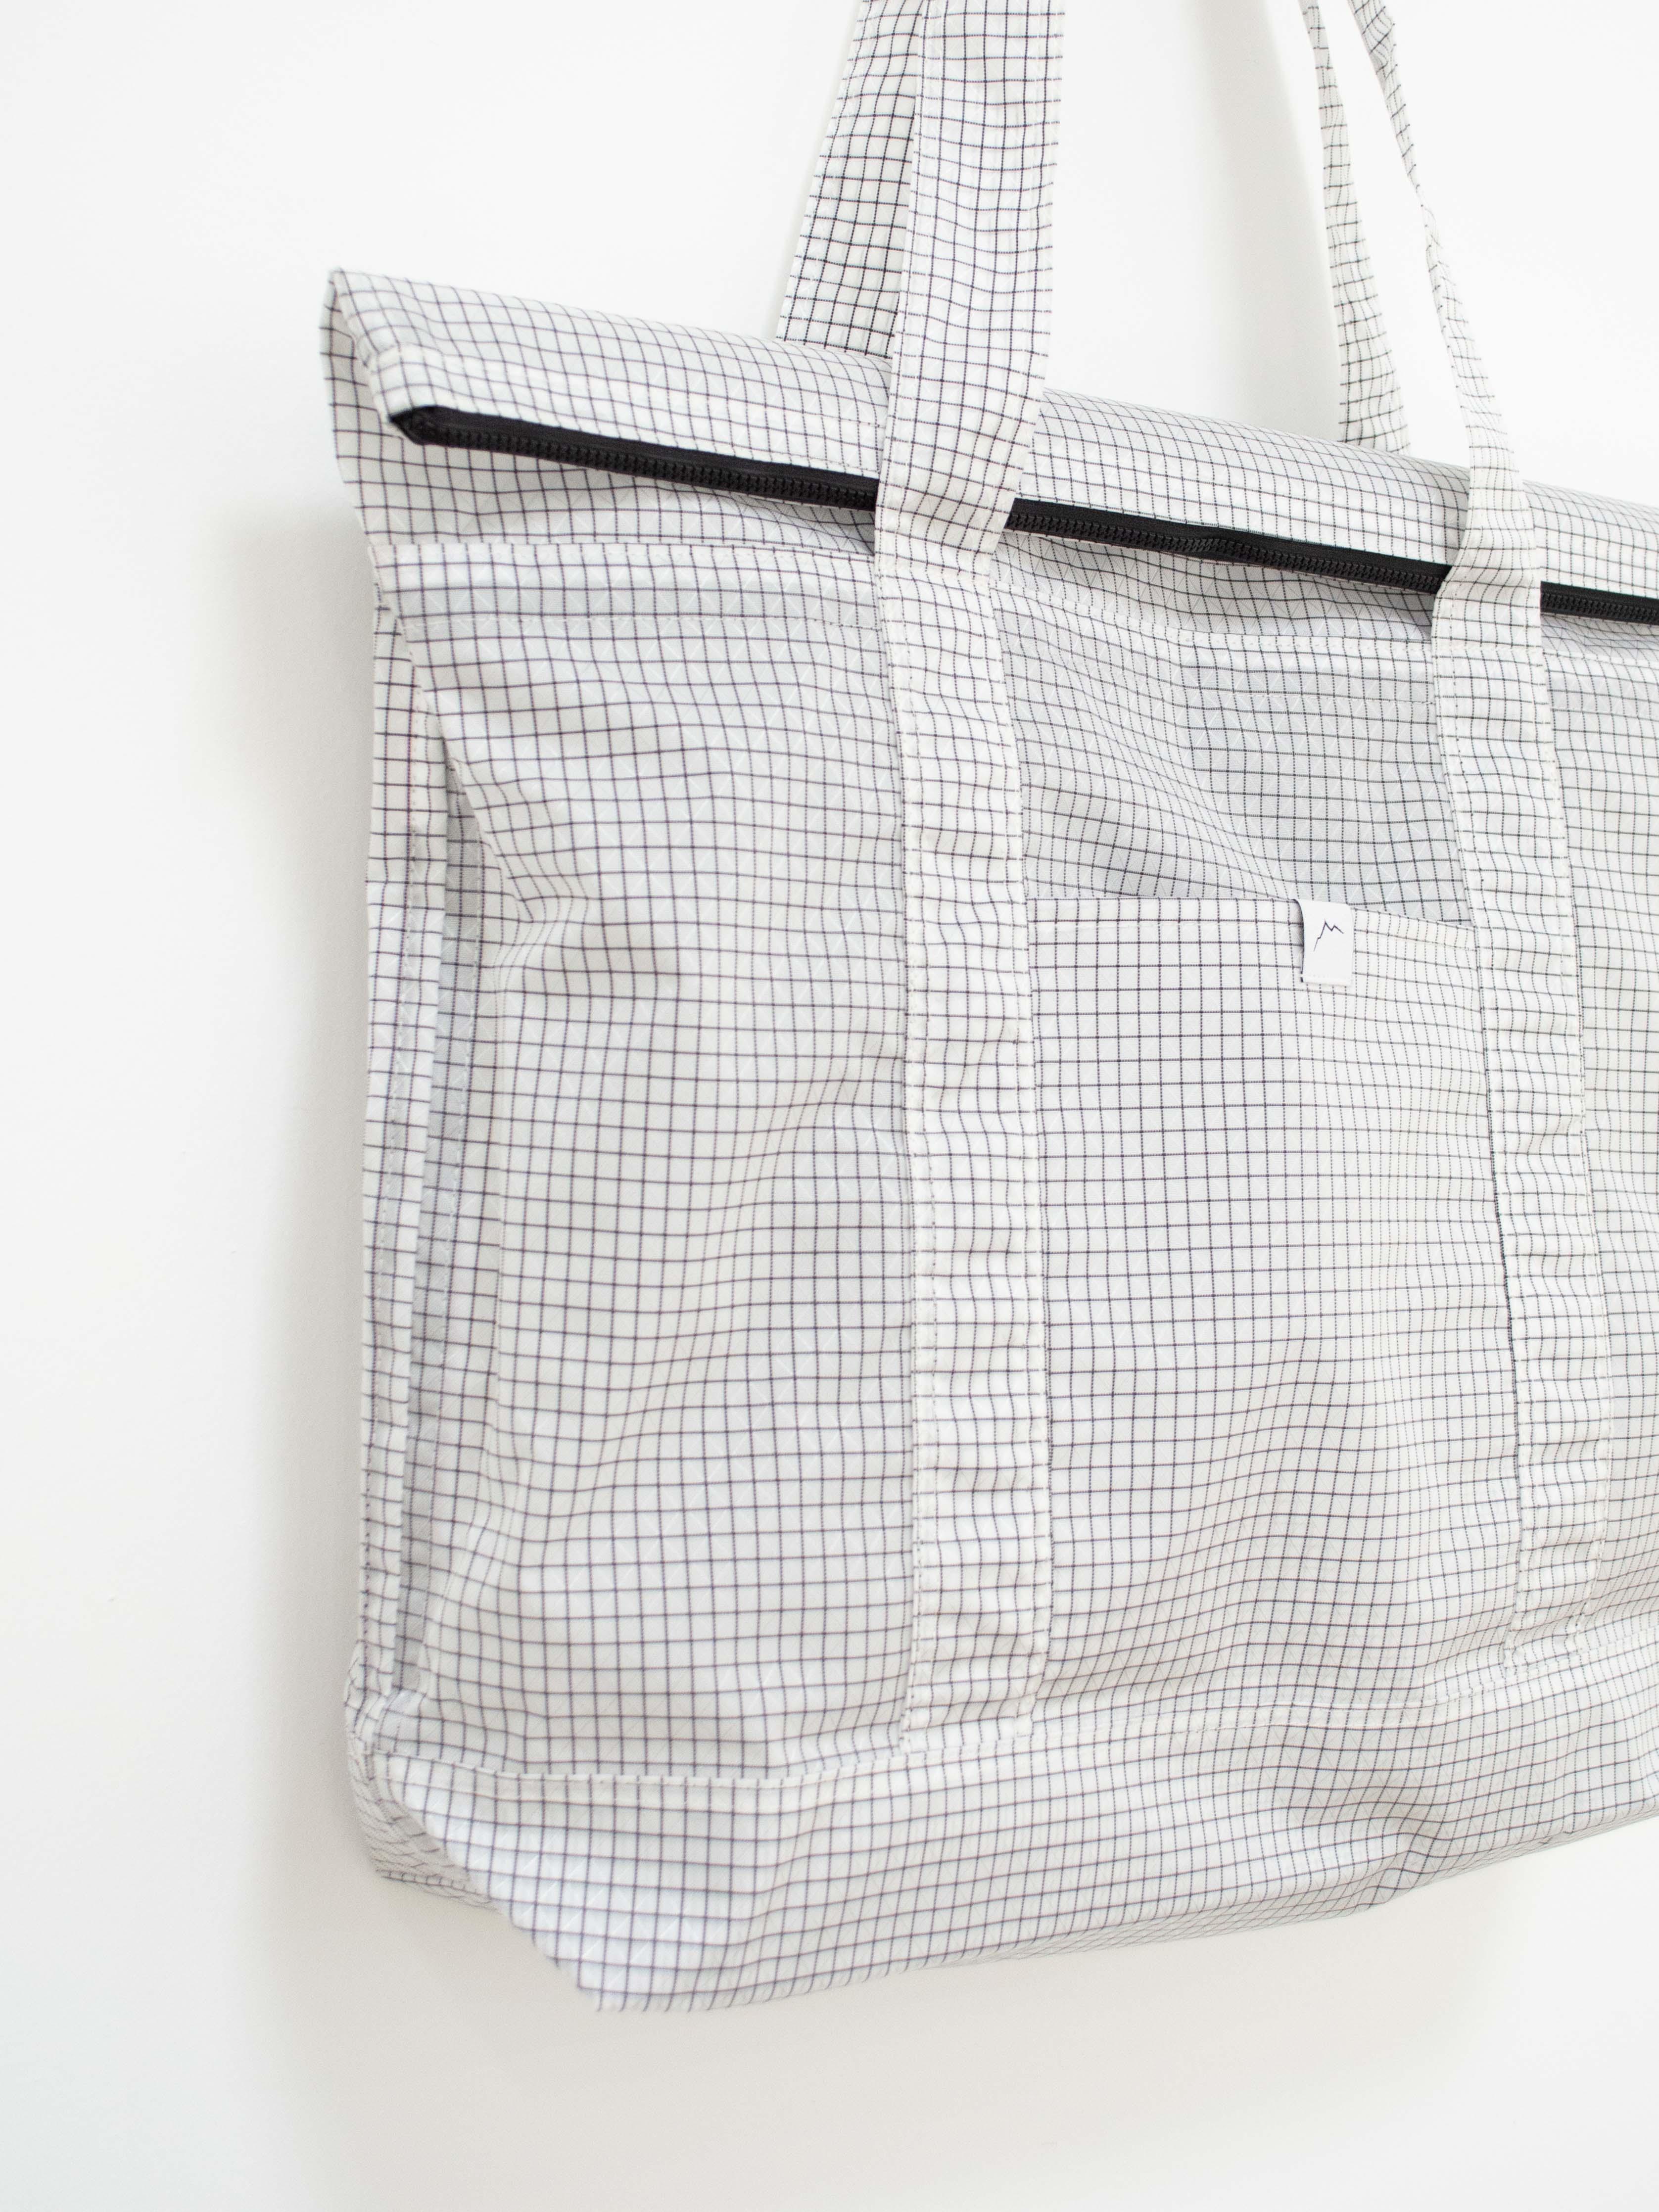 BELT TOTE - CABAS BAG WITH LOGO GRID in neutrals